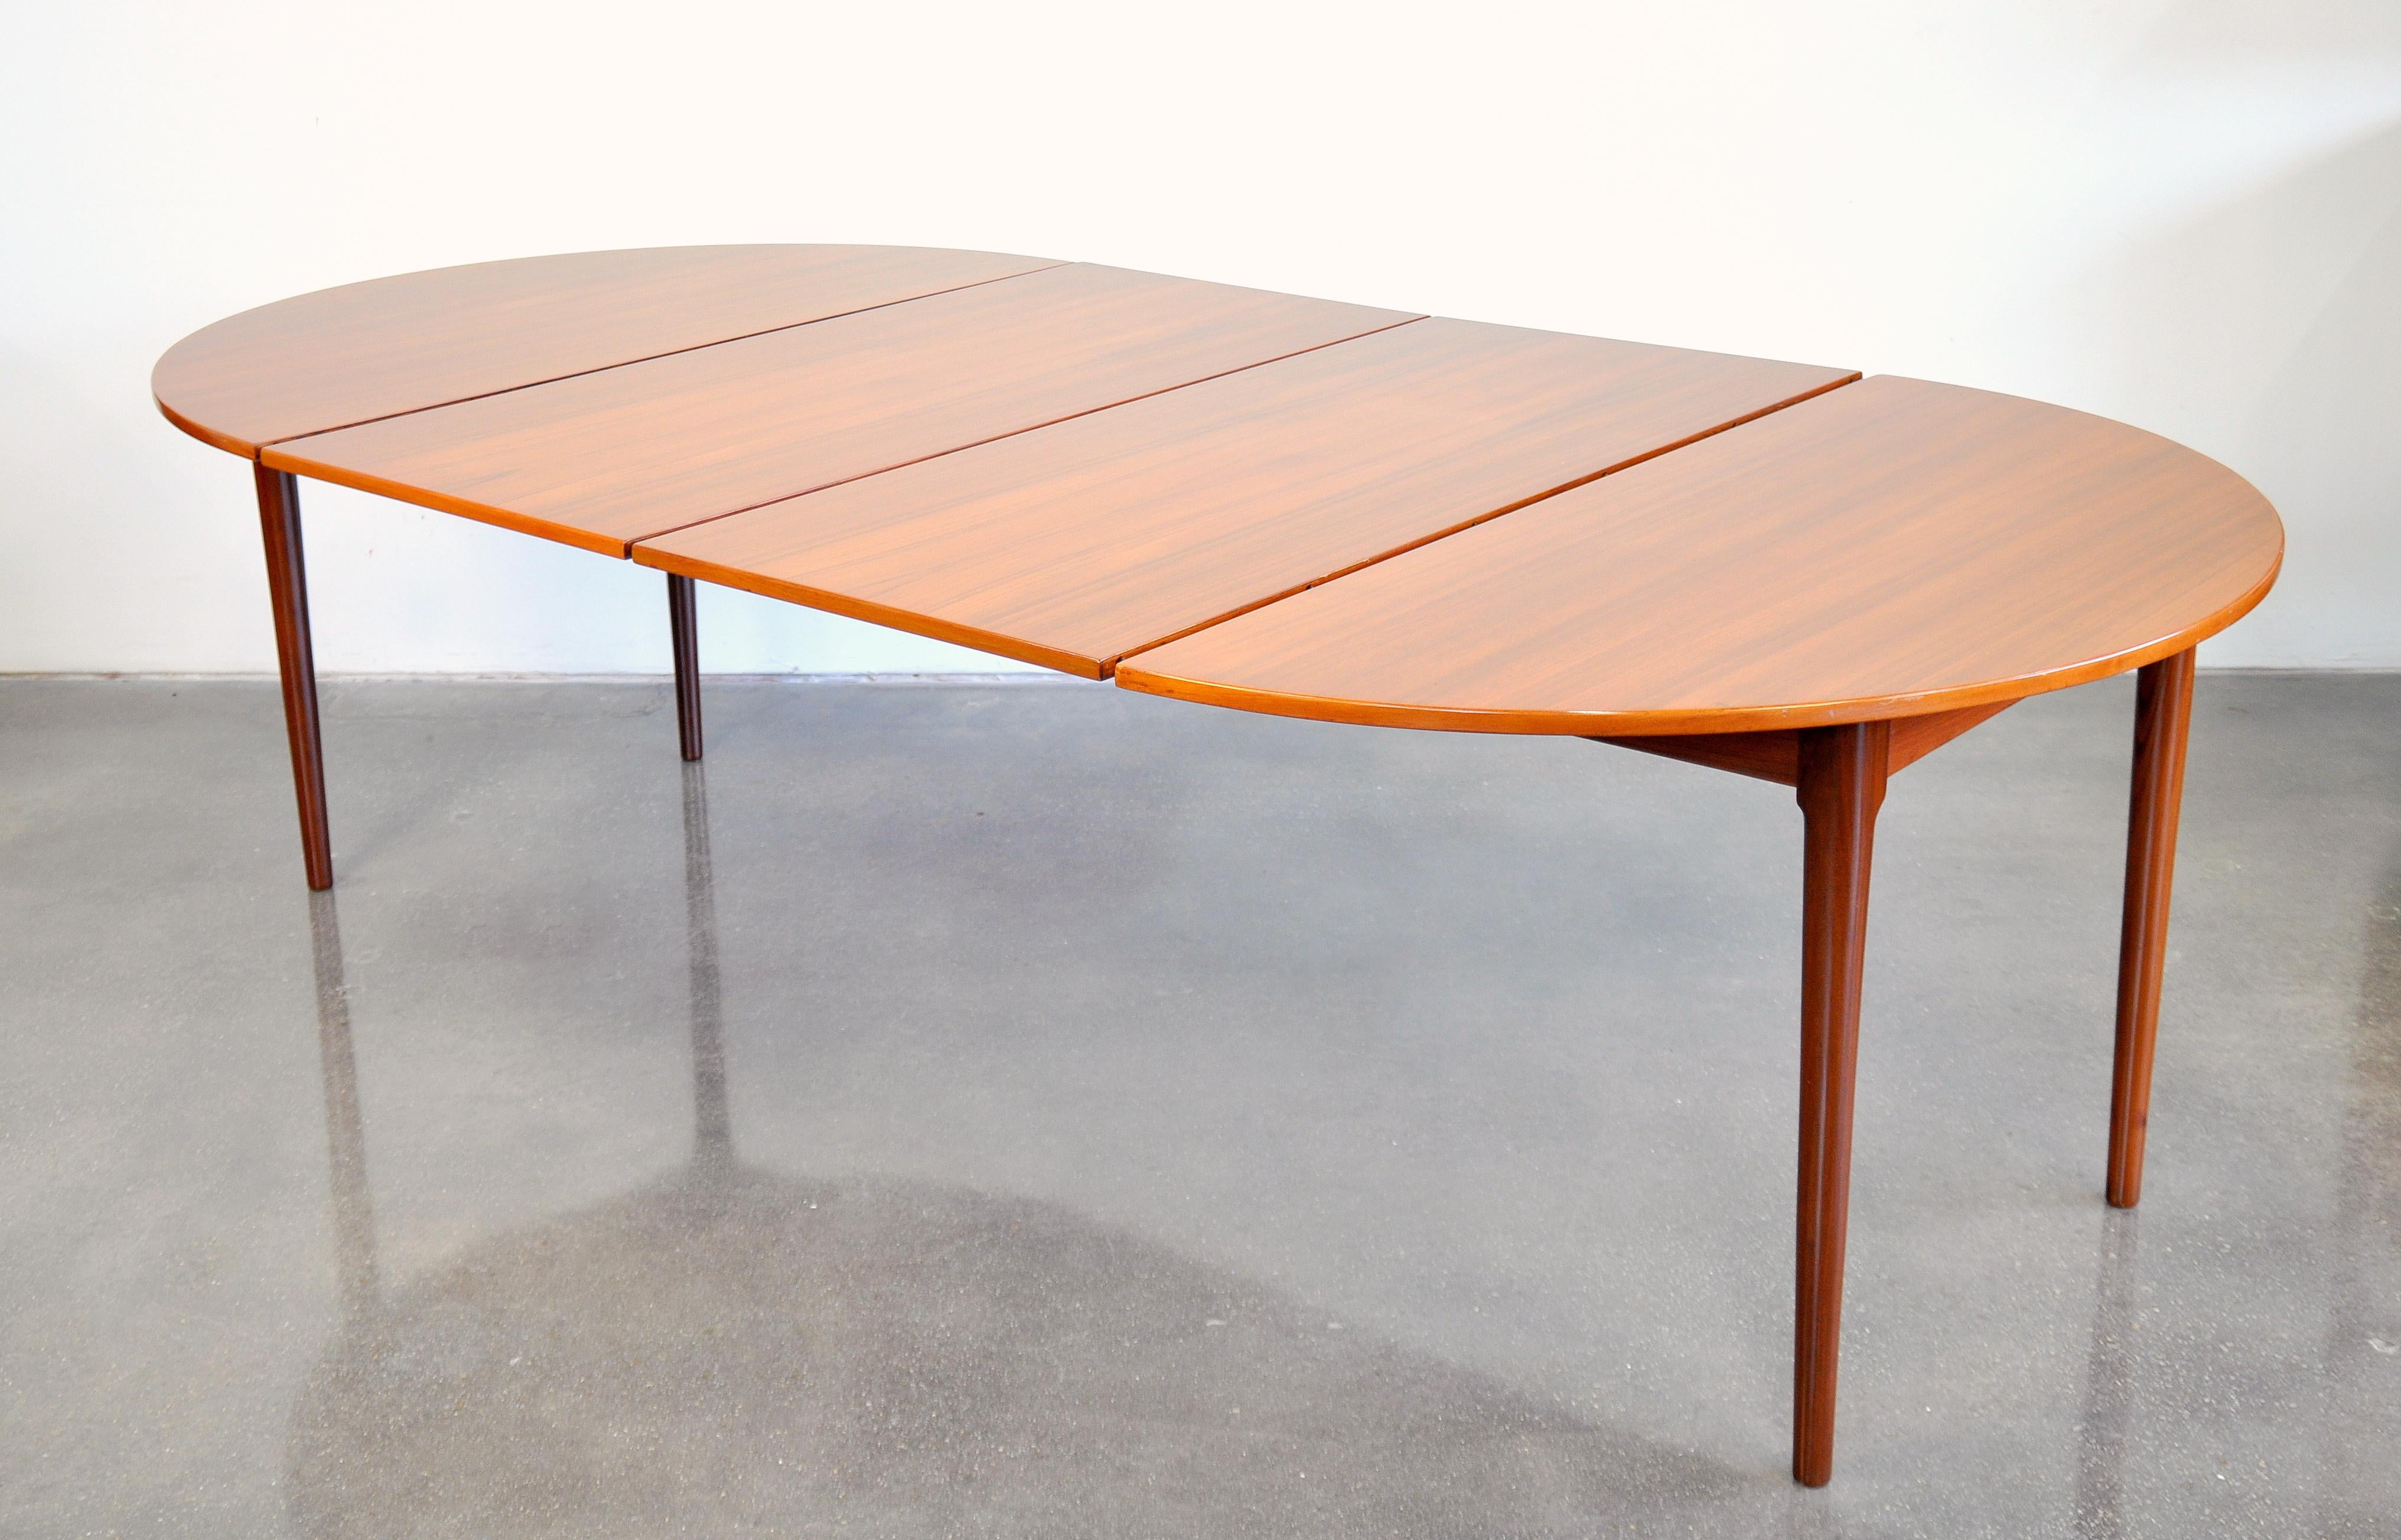 A great Mid-Century vintage round dining table manufactured in Denmark by Falster and dating from the 1960s. The table seats four when compact, but can be extended with two 23 inch leaves to become oval and comfortably seat 10 people. When compact,